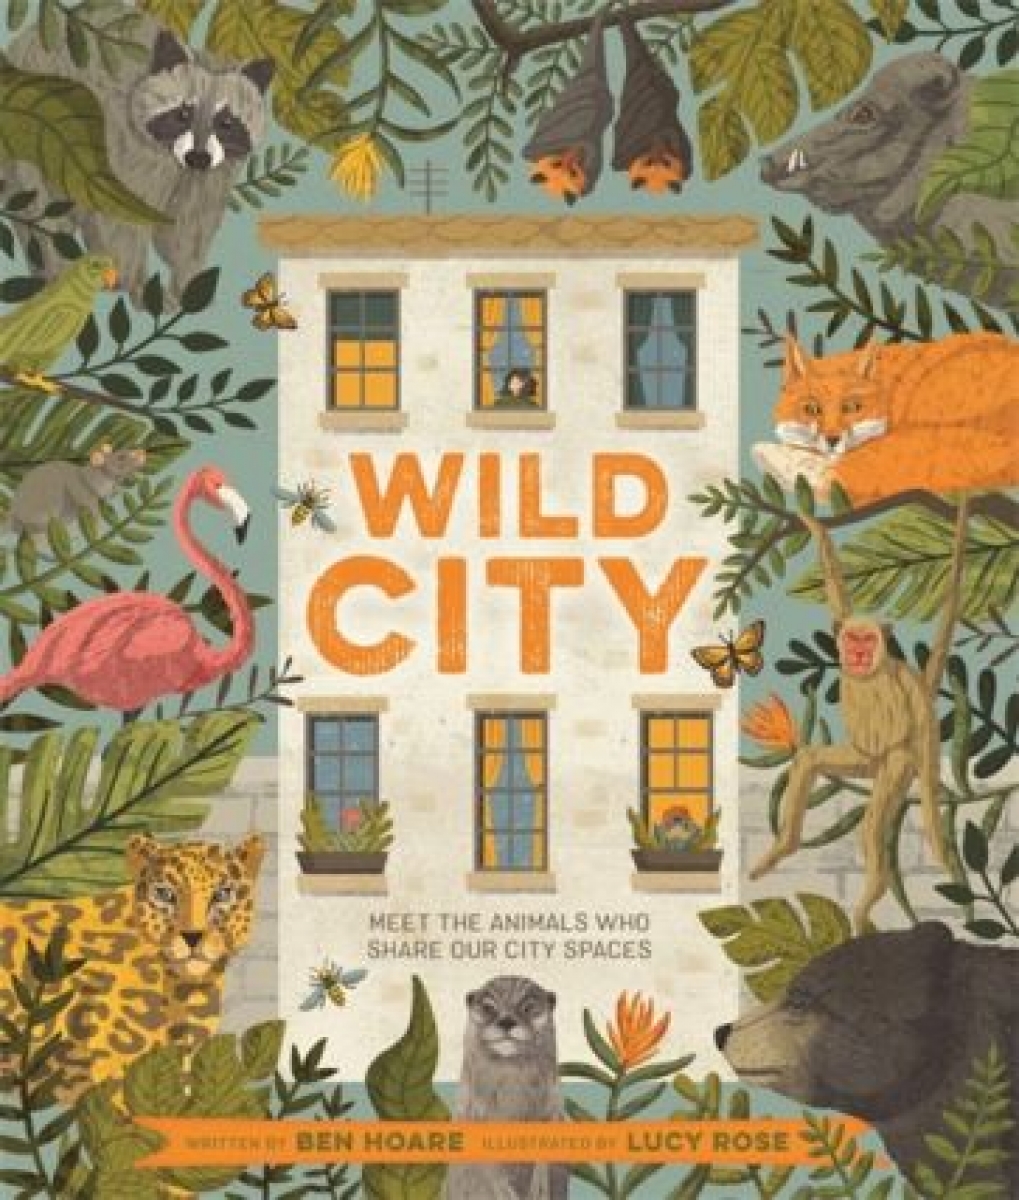 Hoare Ben Wild City. Meet the animals who share our city spaces 